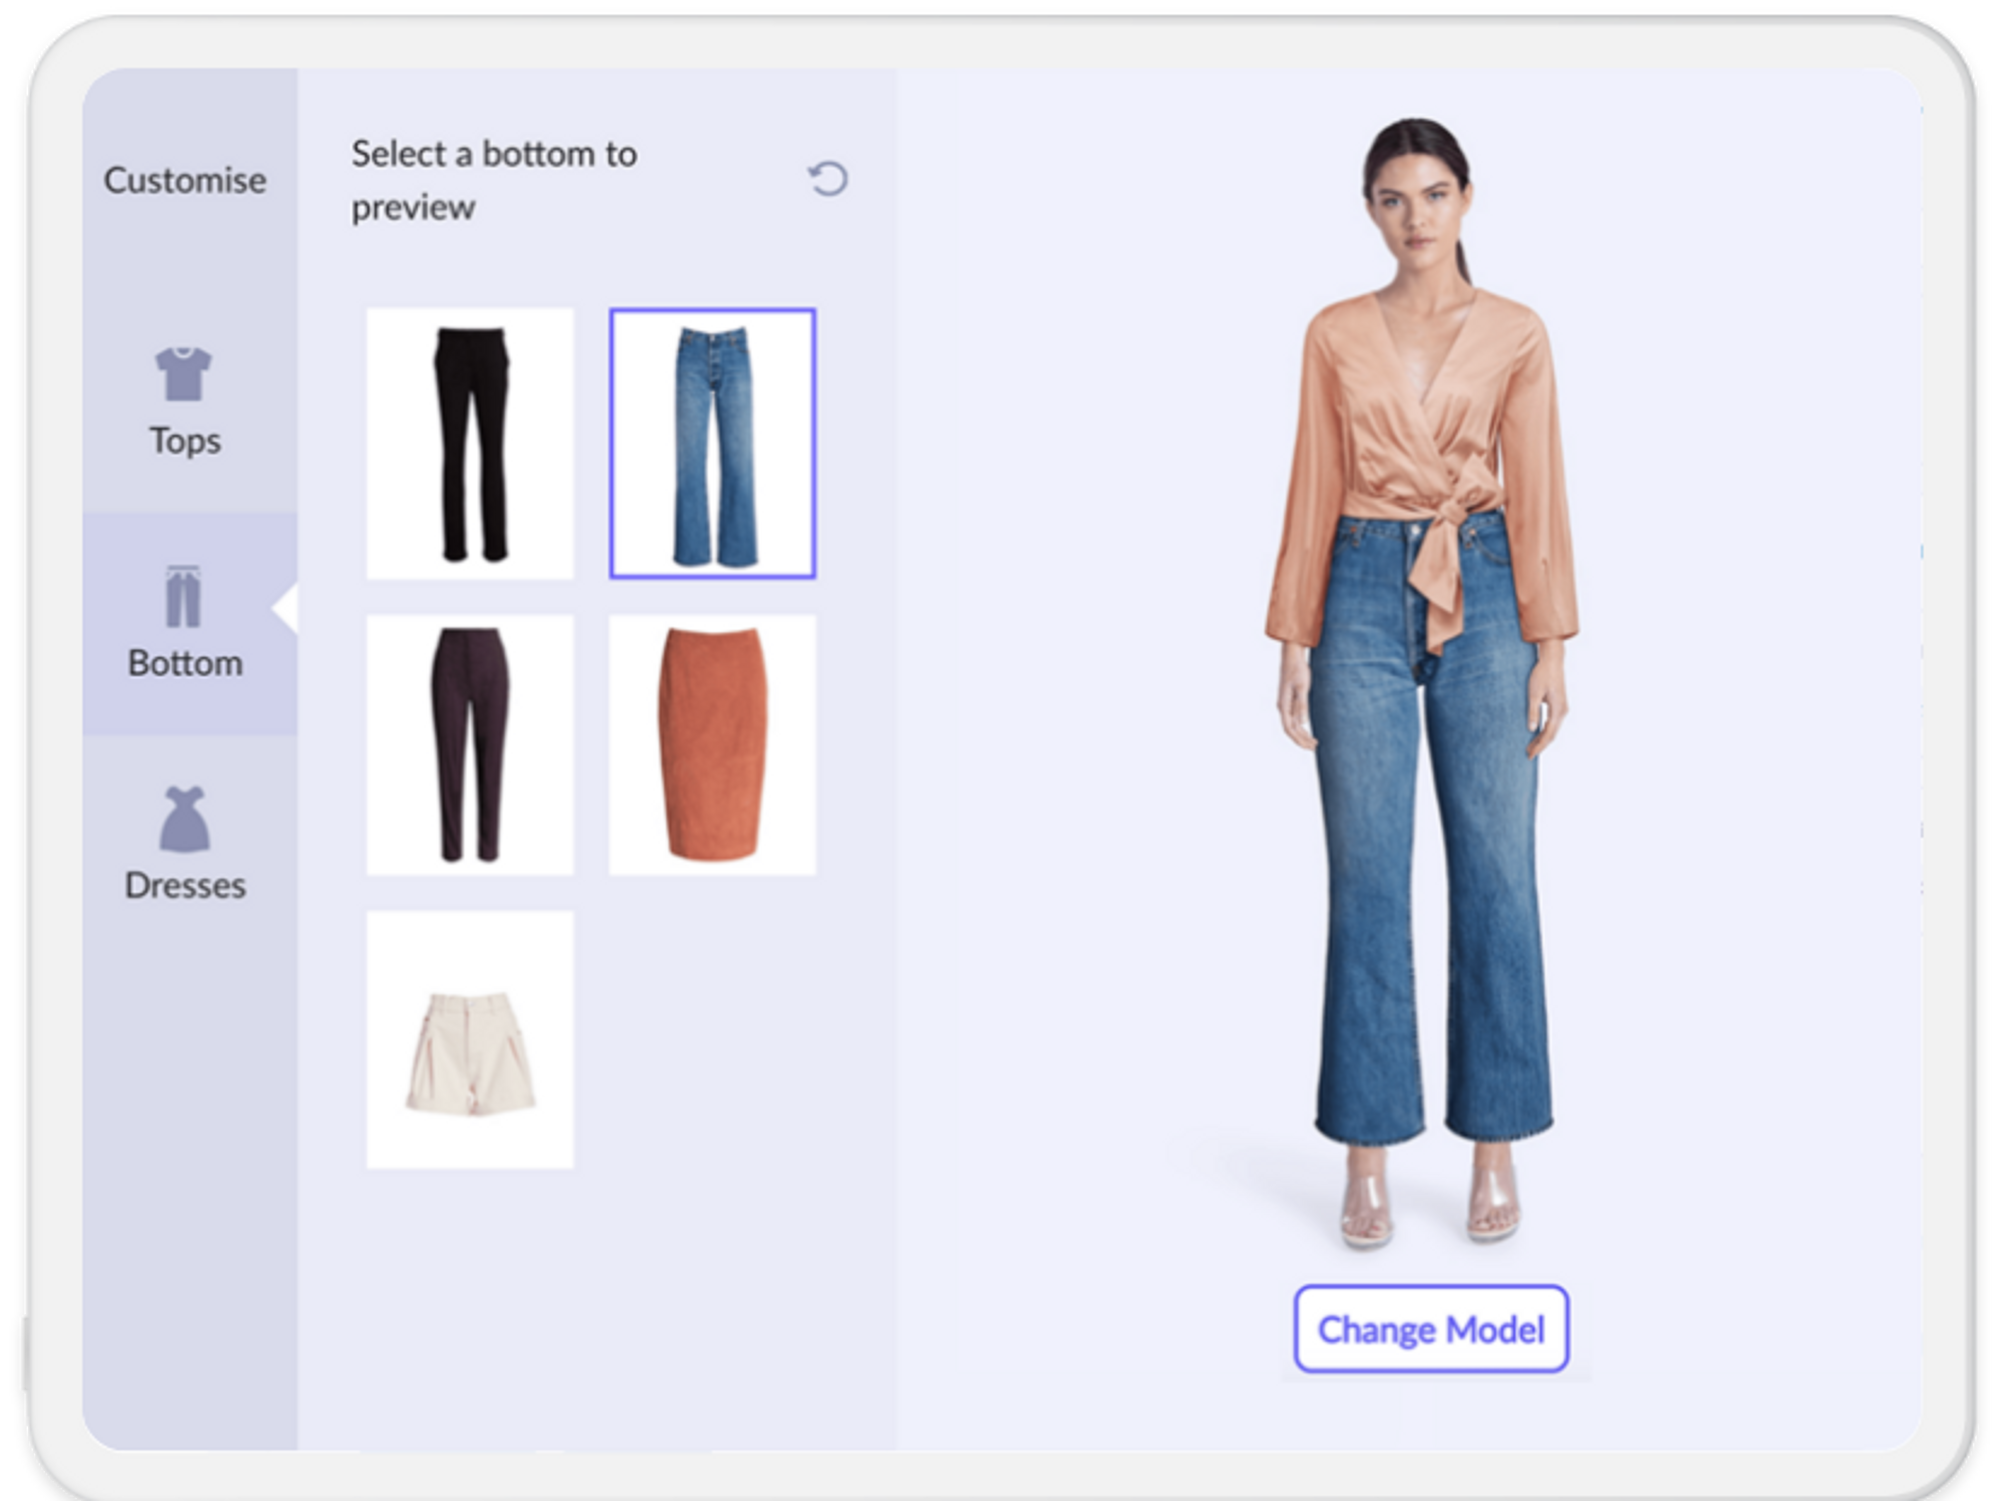 Virtual fitting room technology in your online store.